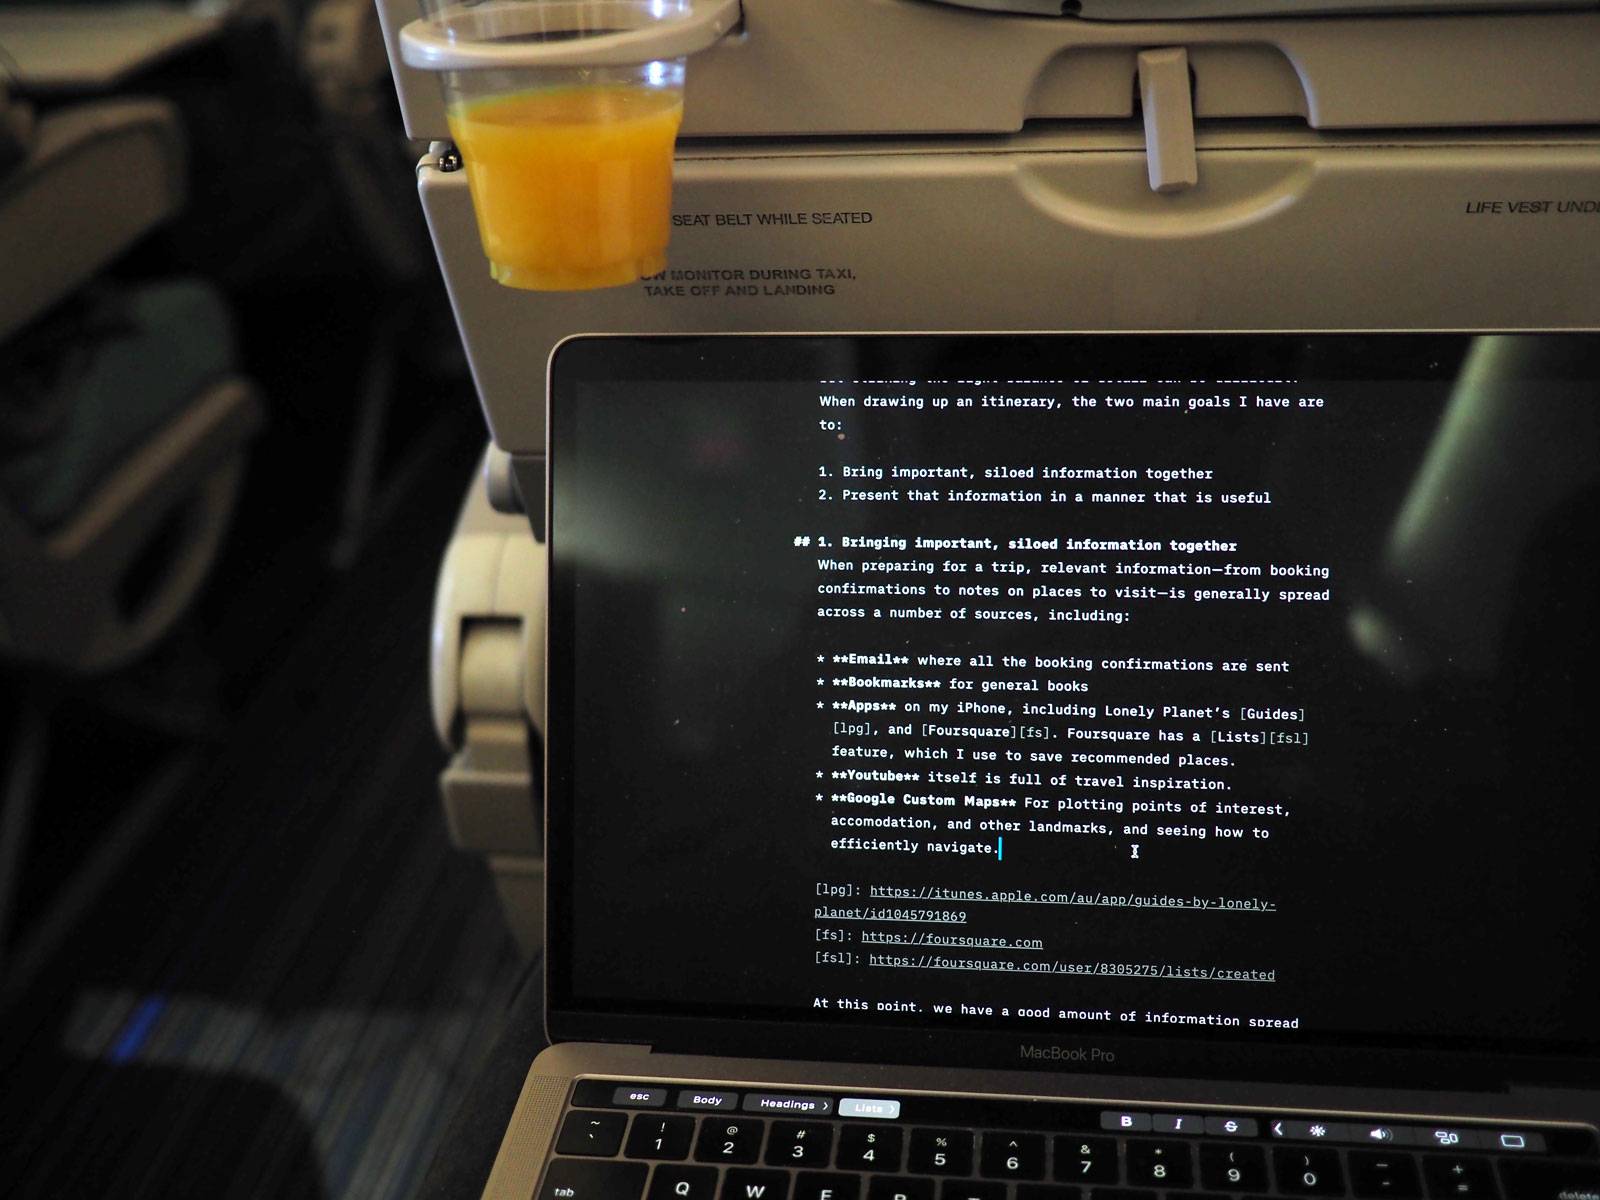 Writing about the itinerary prototype en route to Singapore